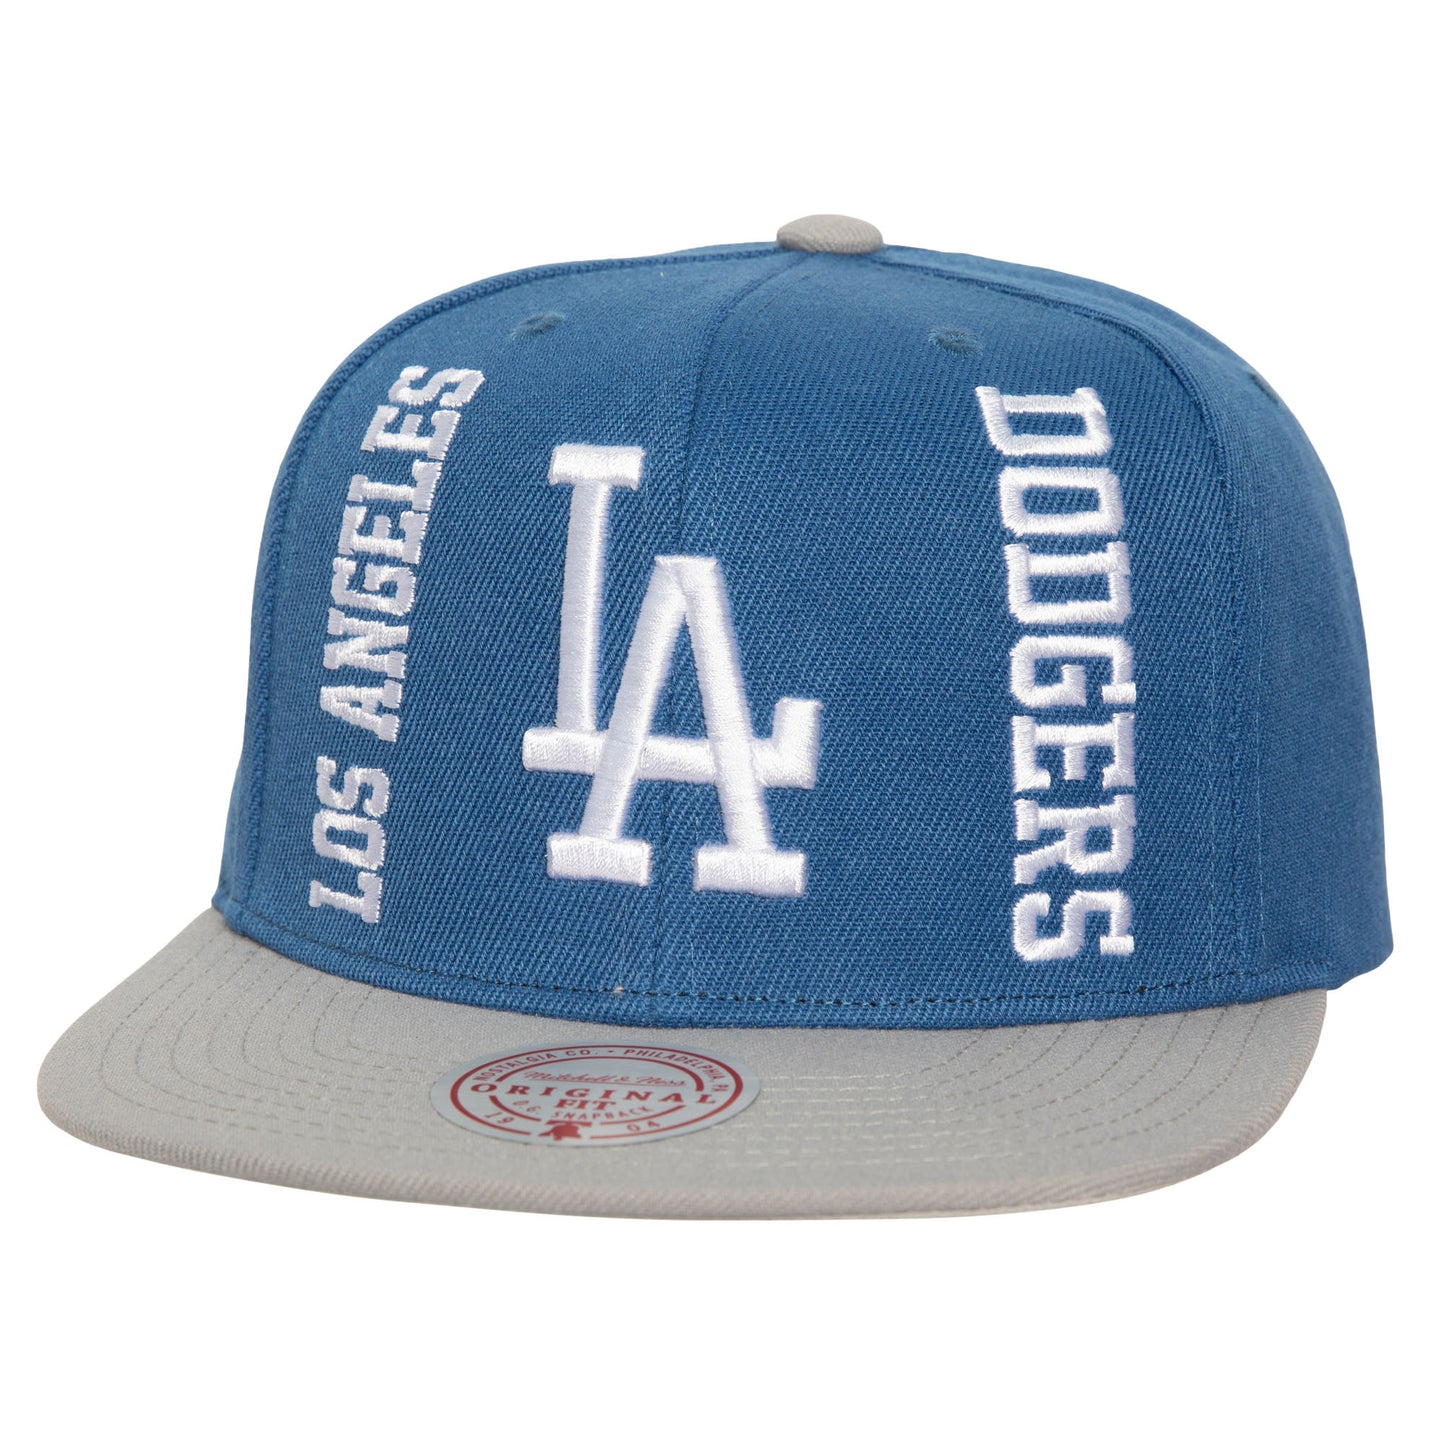 Los Angeles Dodgers Mitchell & Ness Banner Snapback Hat-Blue